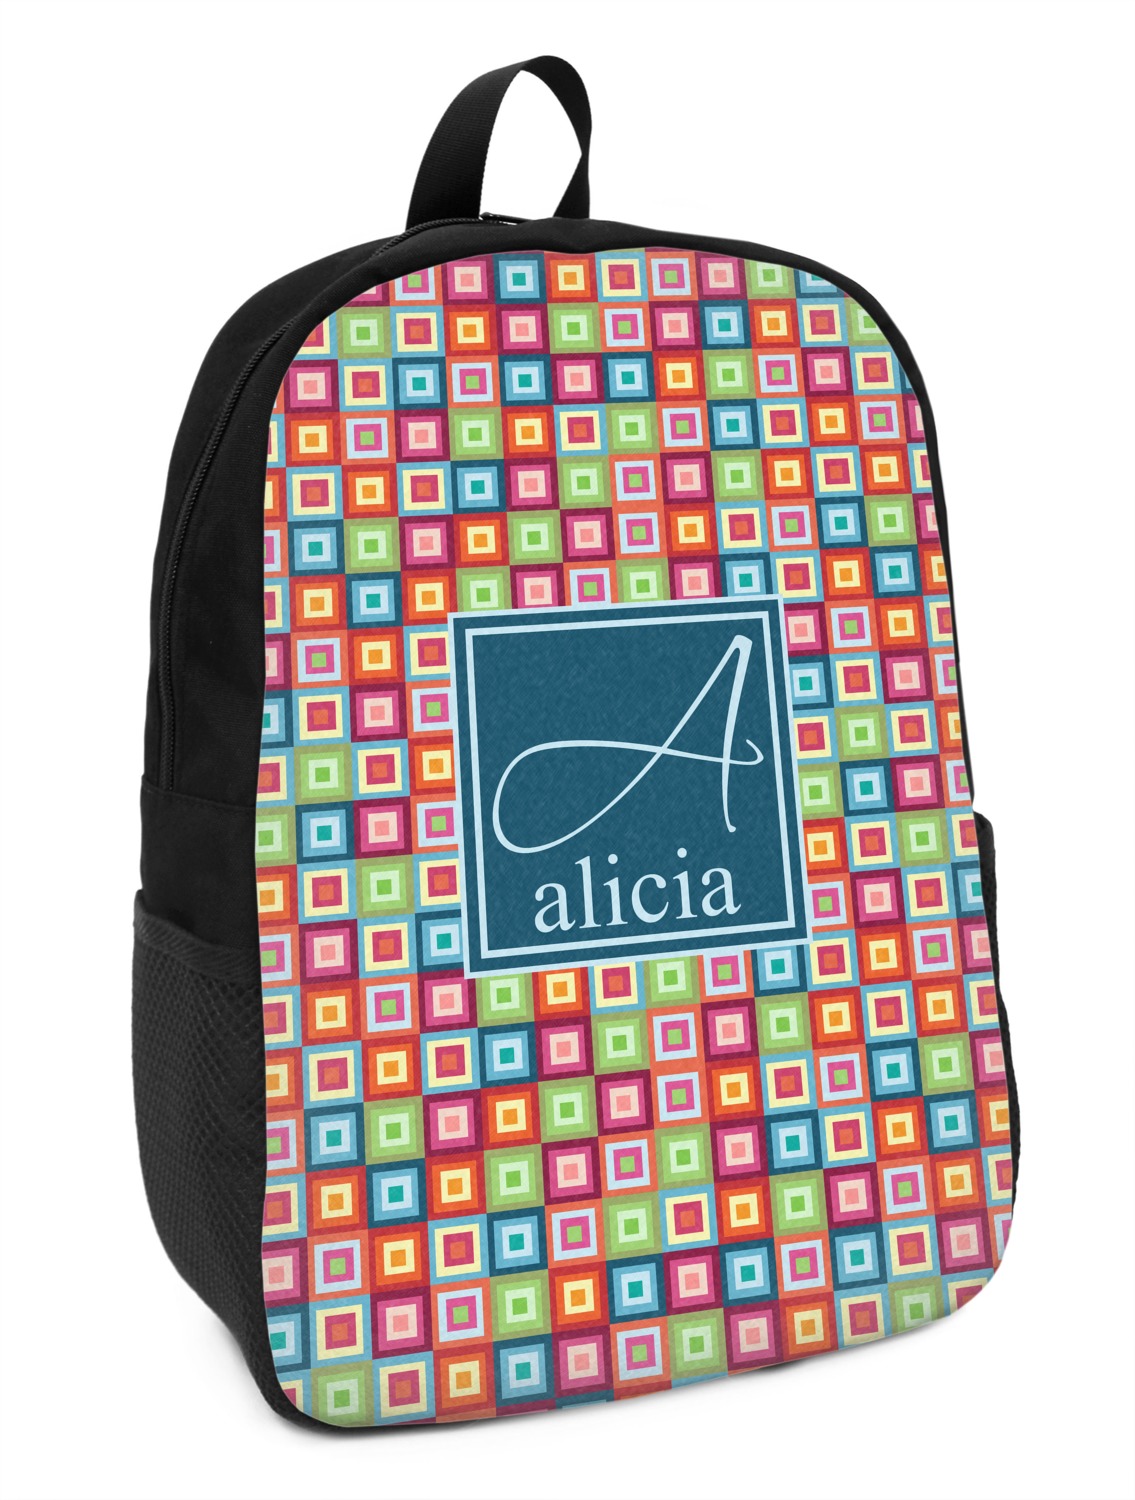 Retro Circles Kids Backpack Personalized 